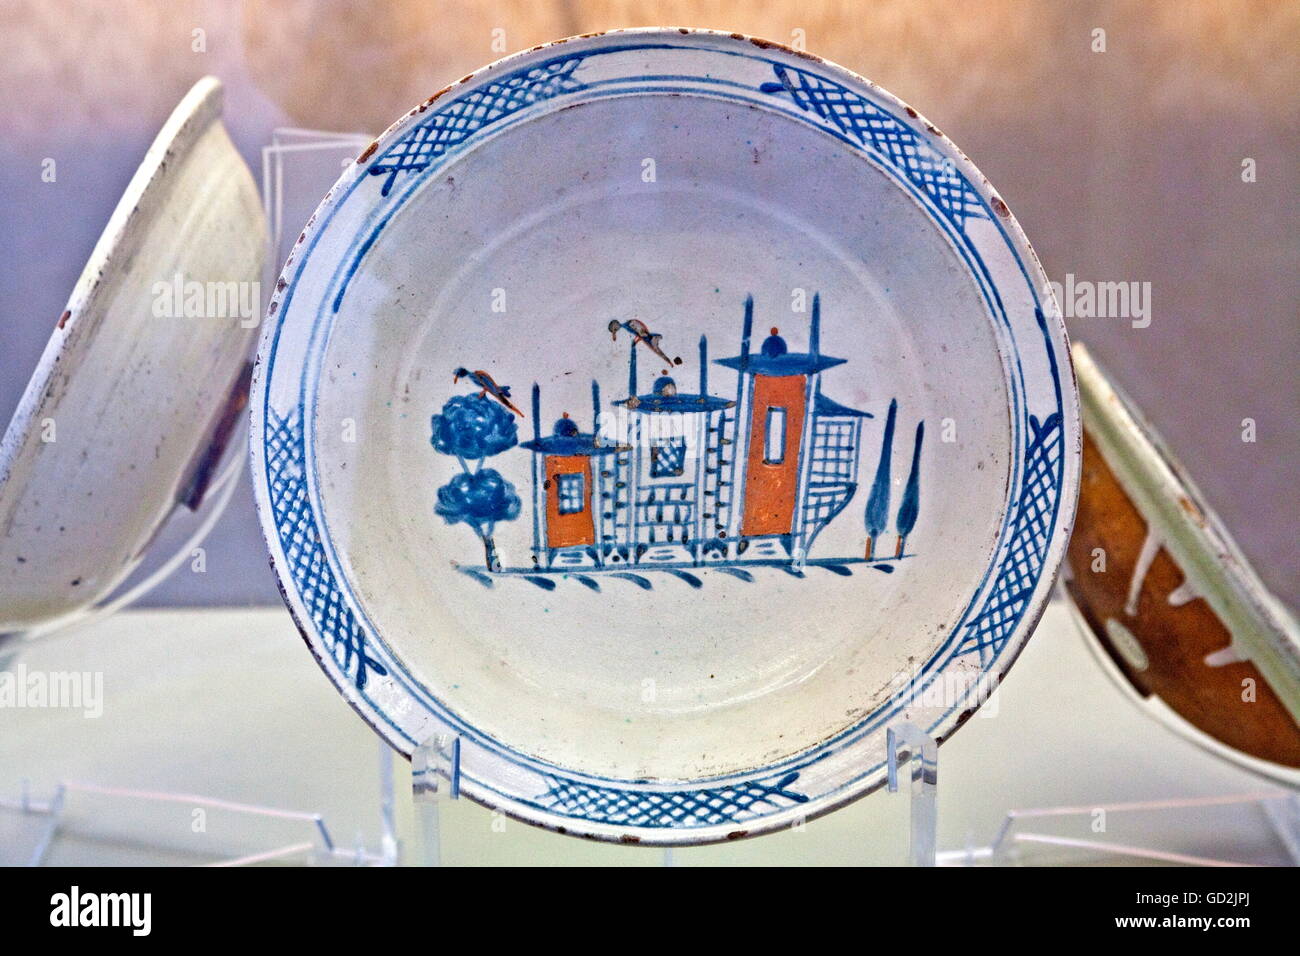 fine arts, ceramics, glazed Iznik plate from the glazed tile pavilion, Cinili Koesk, archaeological museum, Istanbul, Artist's Copyright has not to be cleared Stock Photo